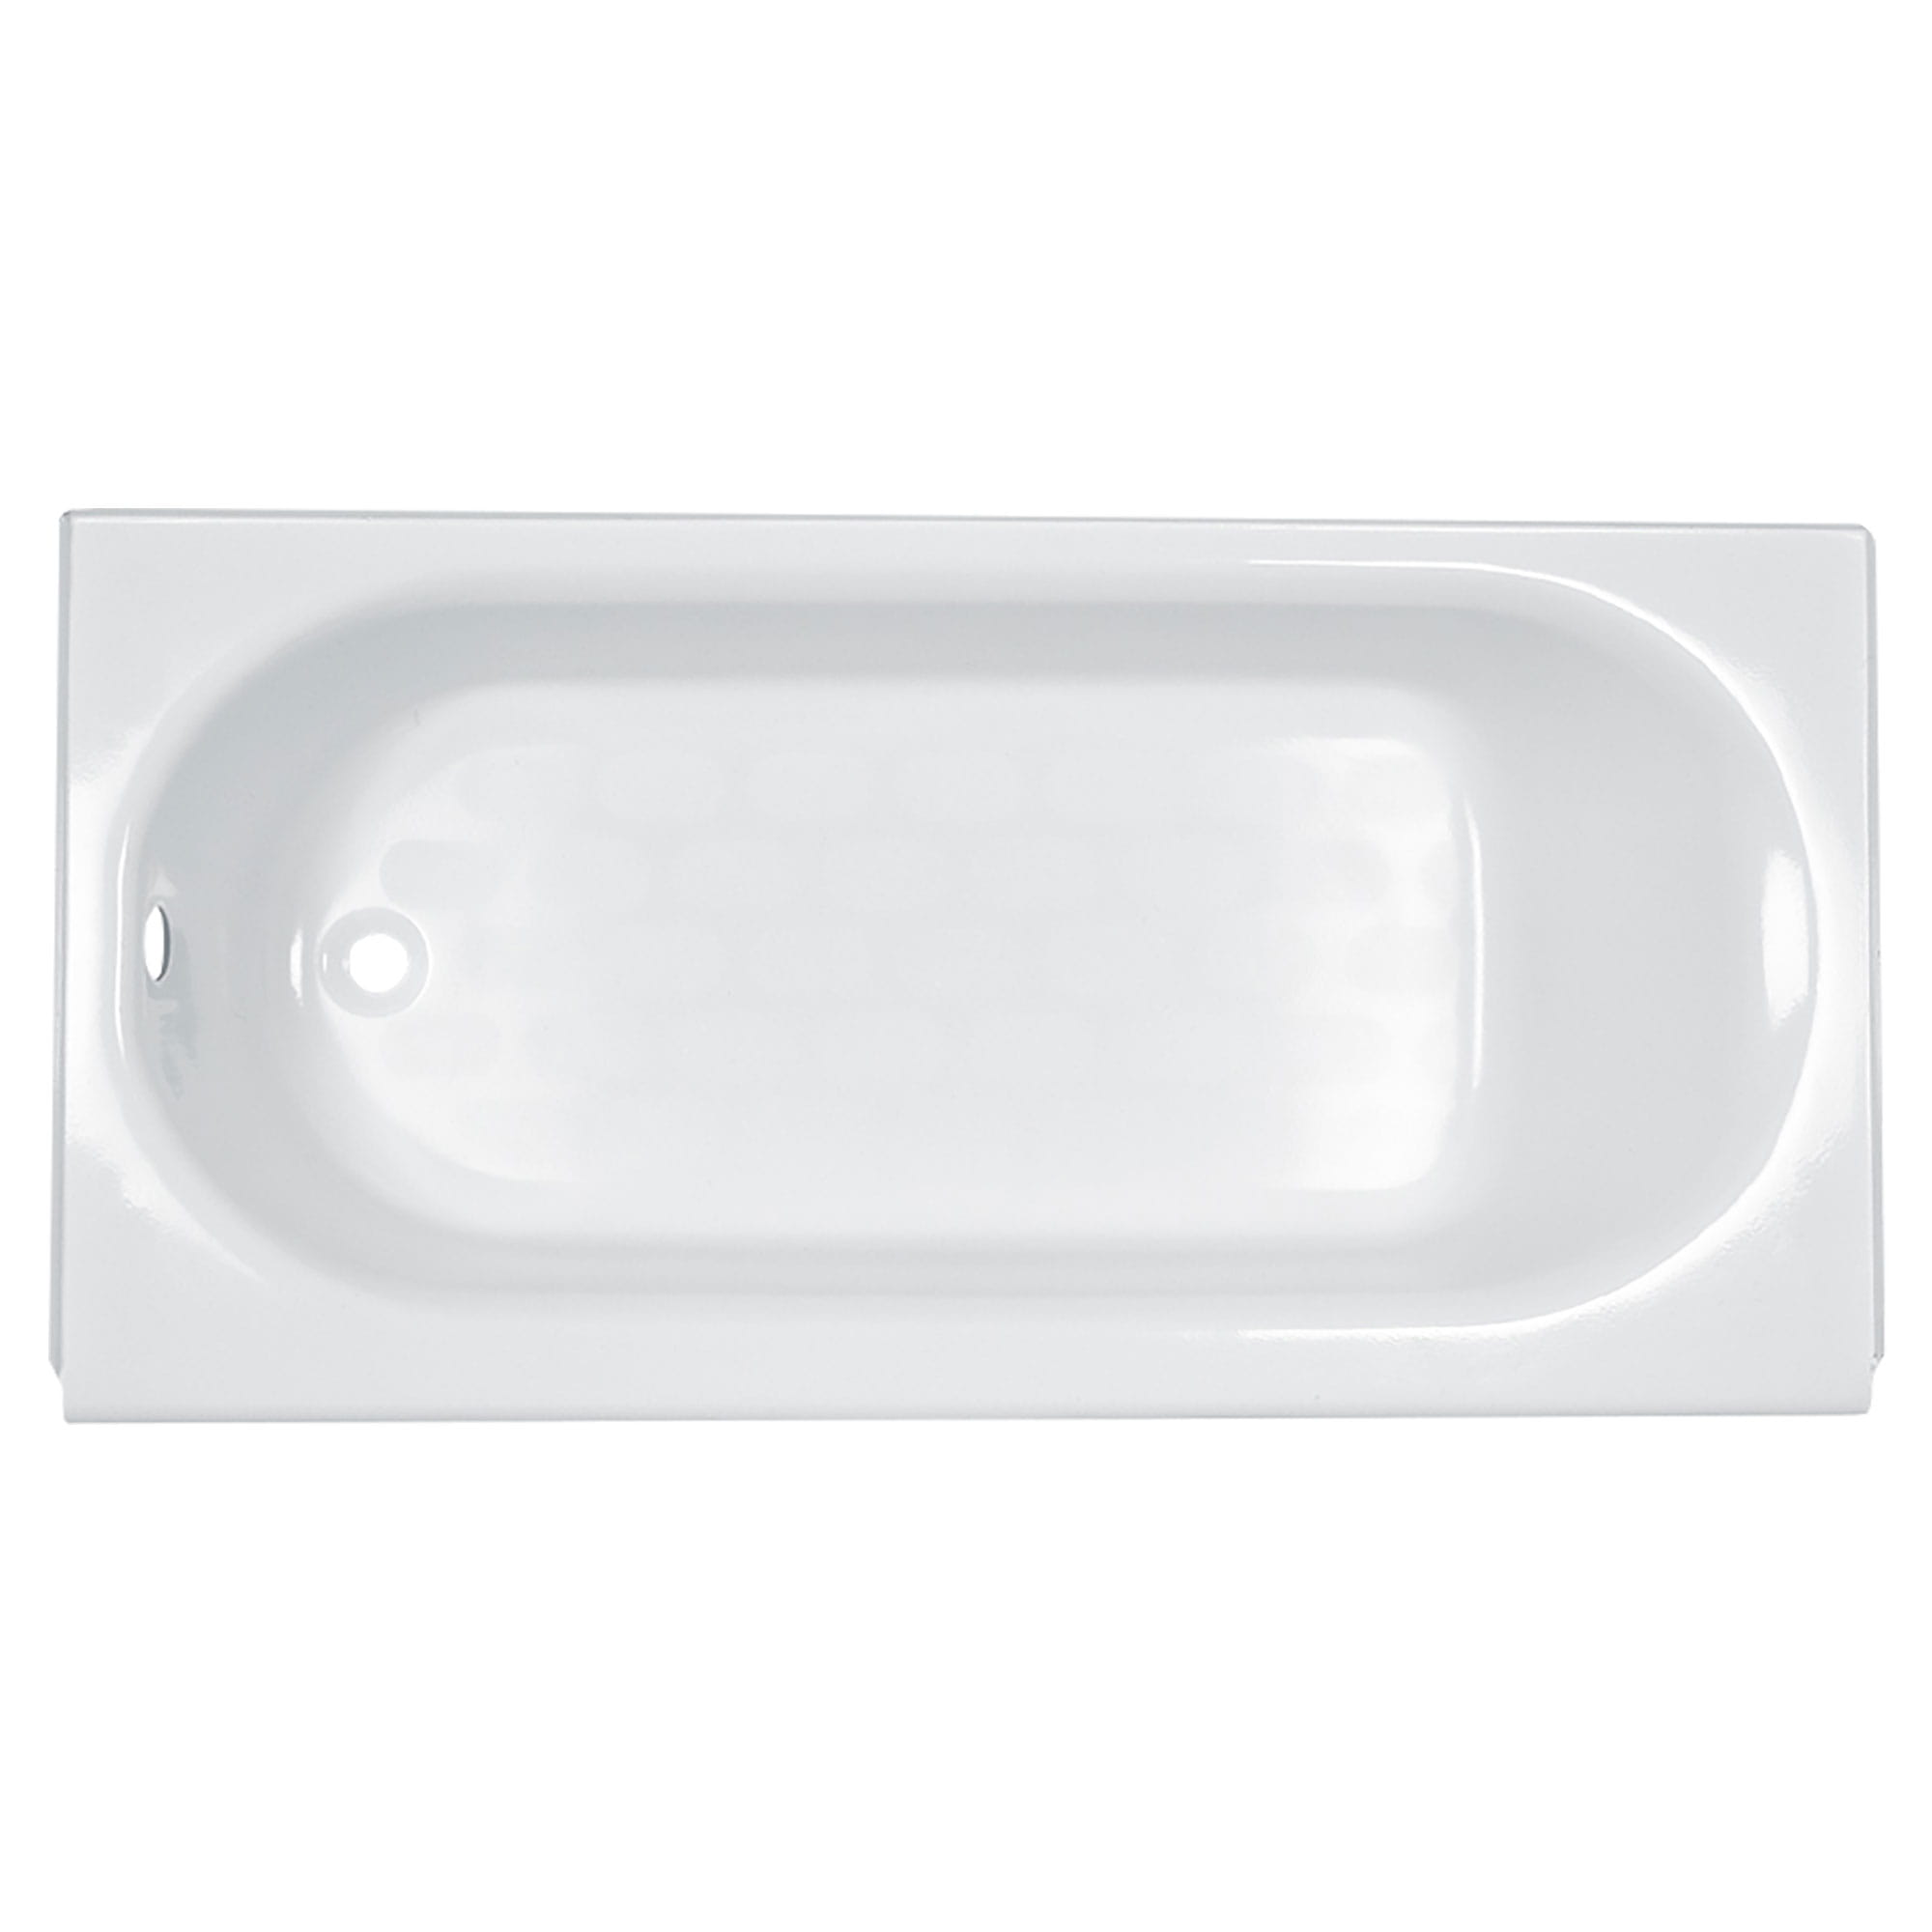 Princeton Americast 60 x 30 Inch Integral Apron Bathtub Left Hand Outlet With Integral Drain WHITE